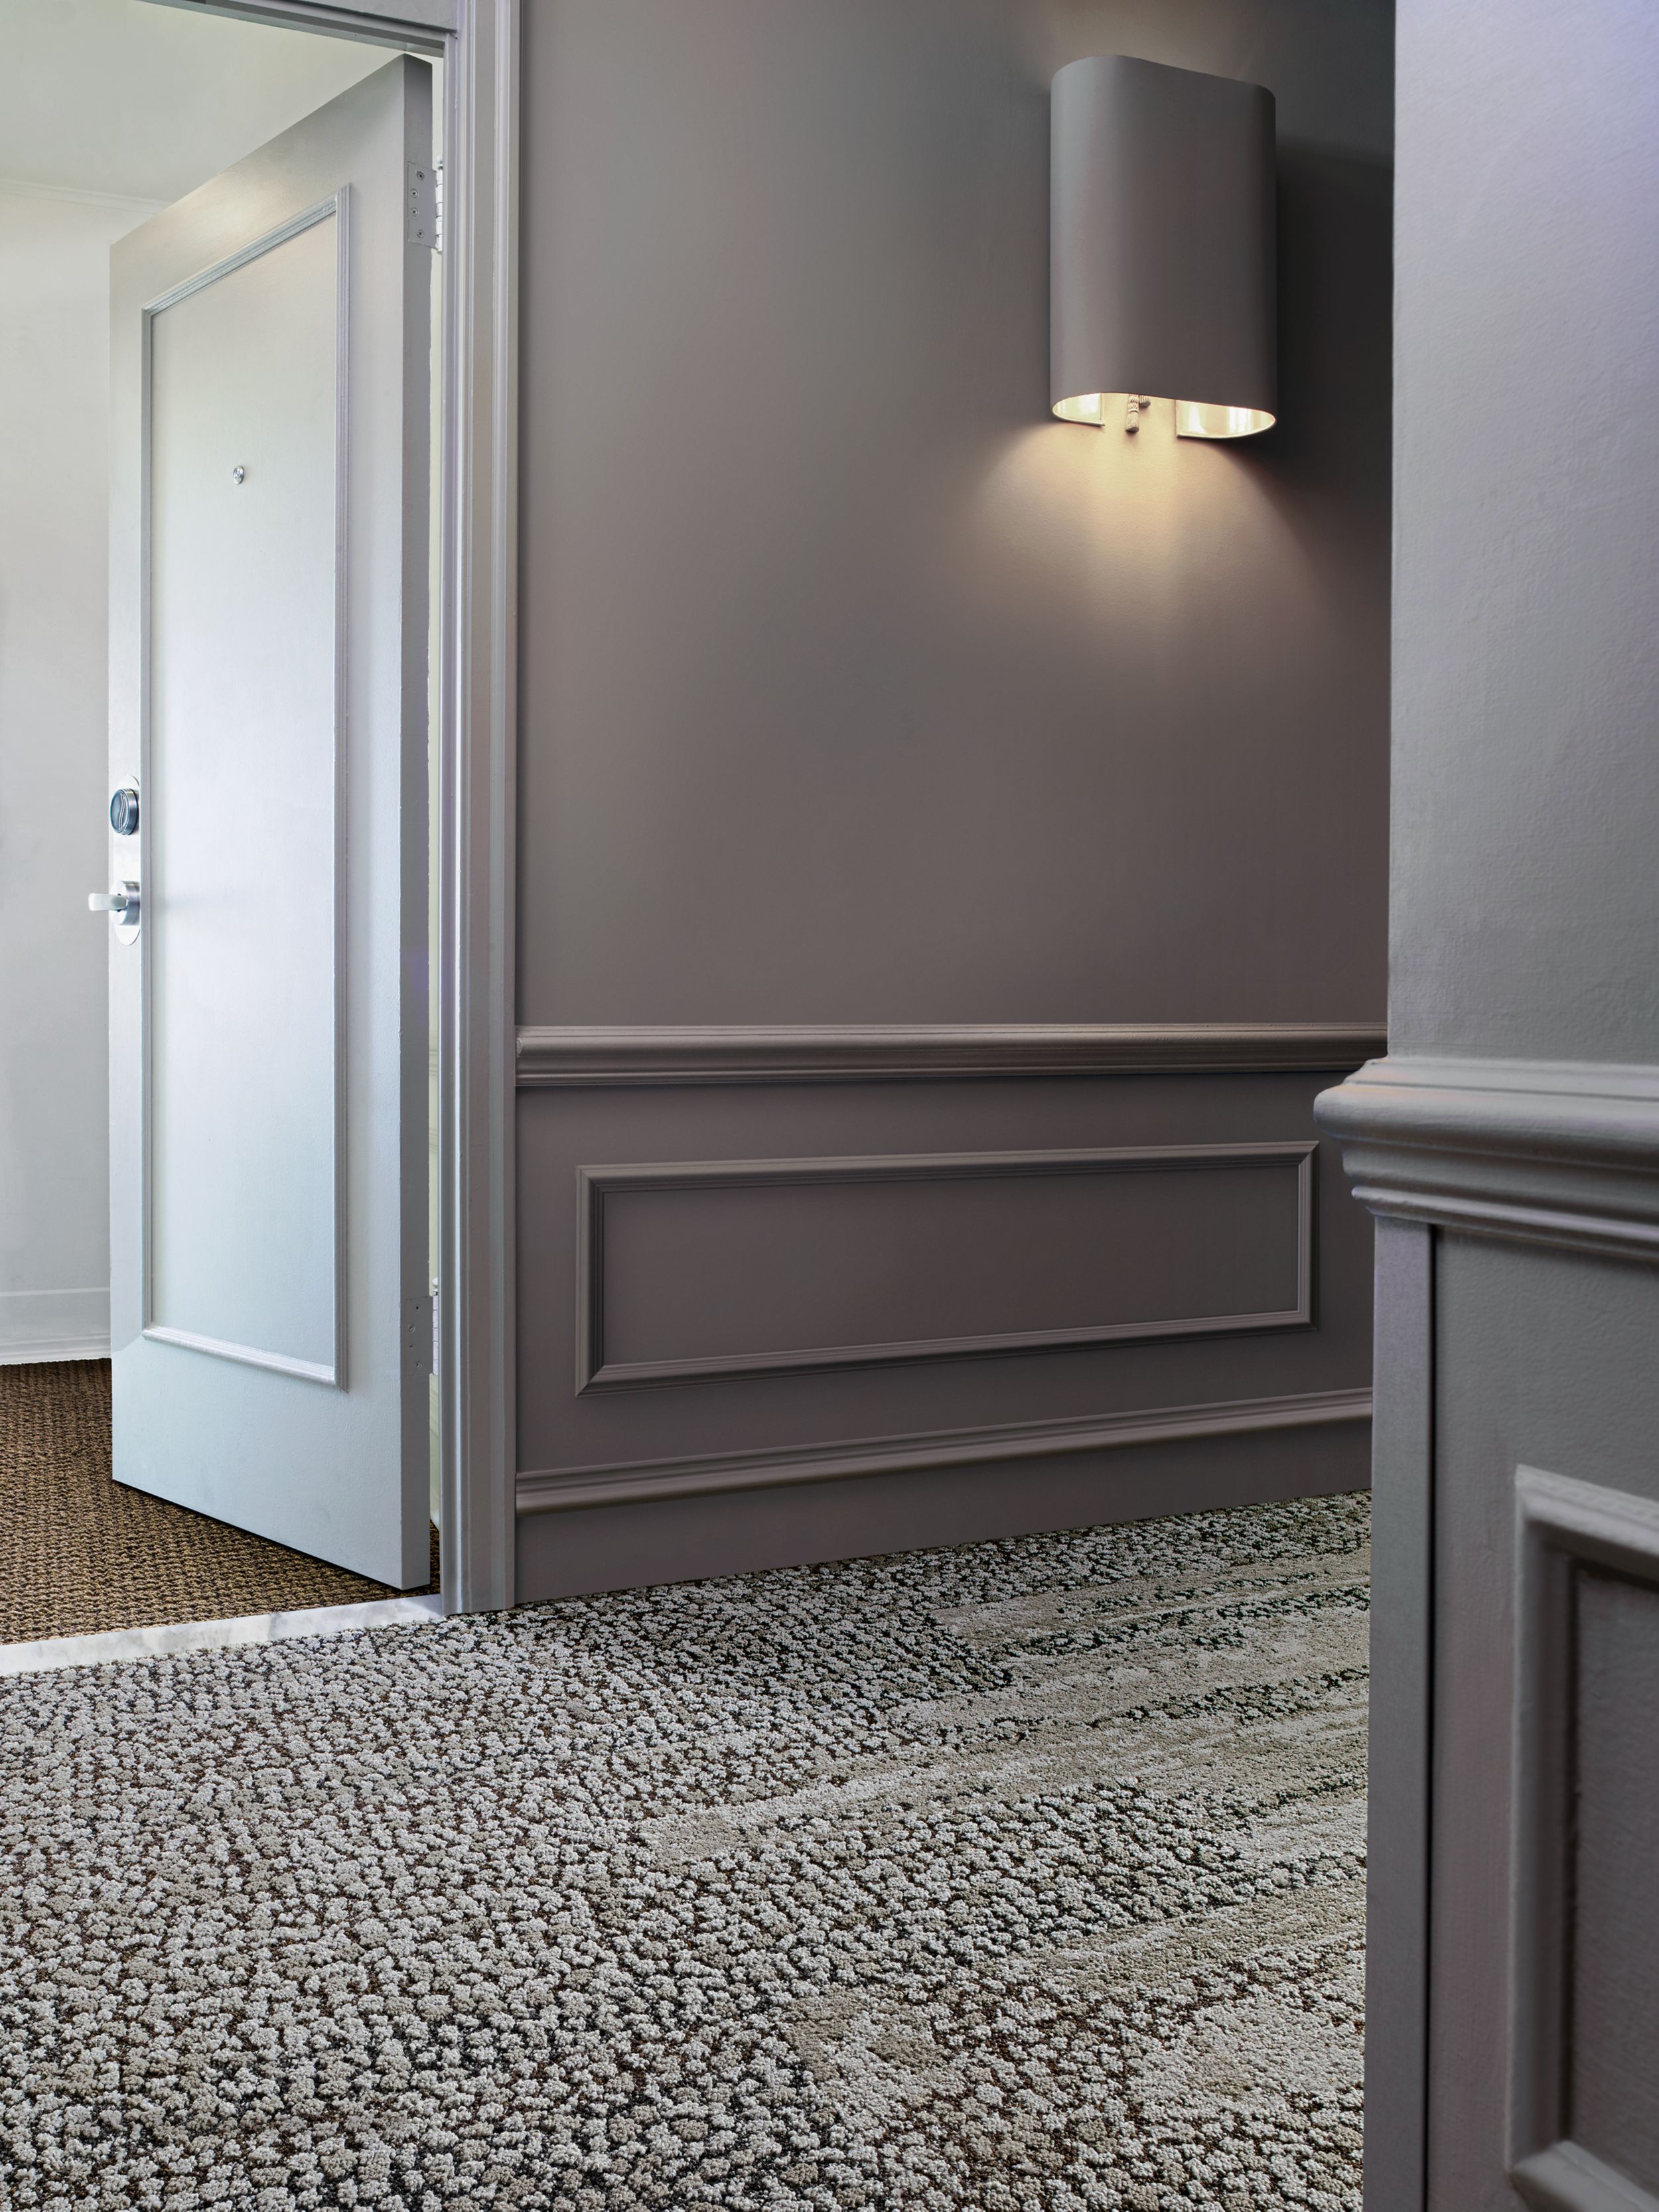 image Interface HN840, HN850 and RMS 607 plank carpet tiles in hotel hallway with hotel room door ajar numéro 12